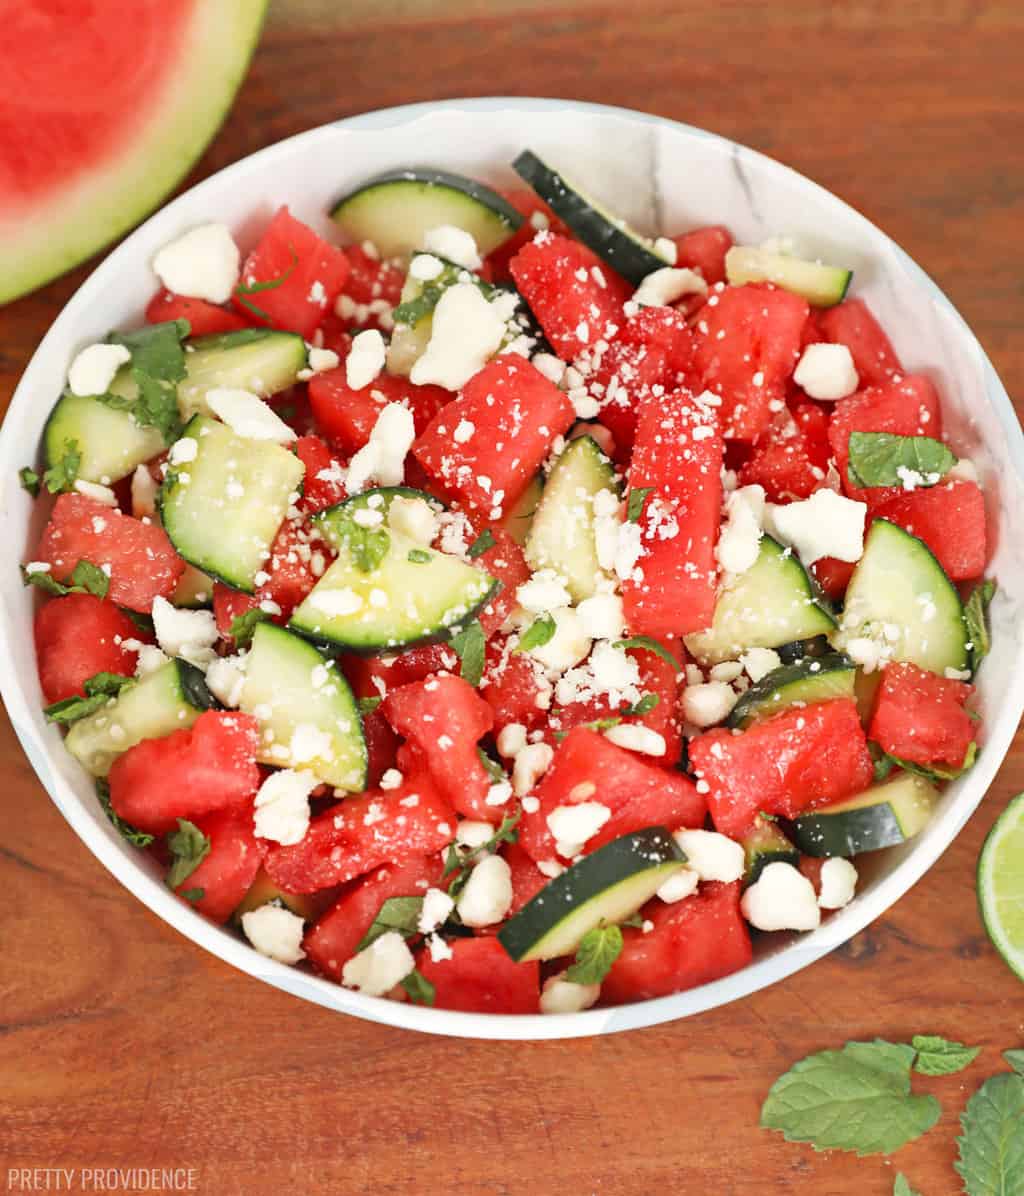 Watermelon feta salad with cucumber and mint in a white bowl.